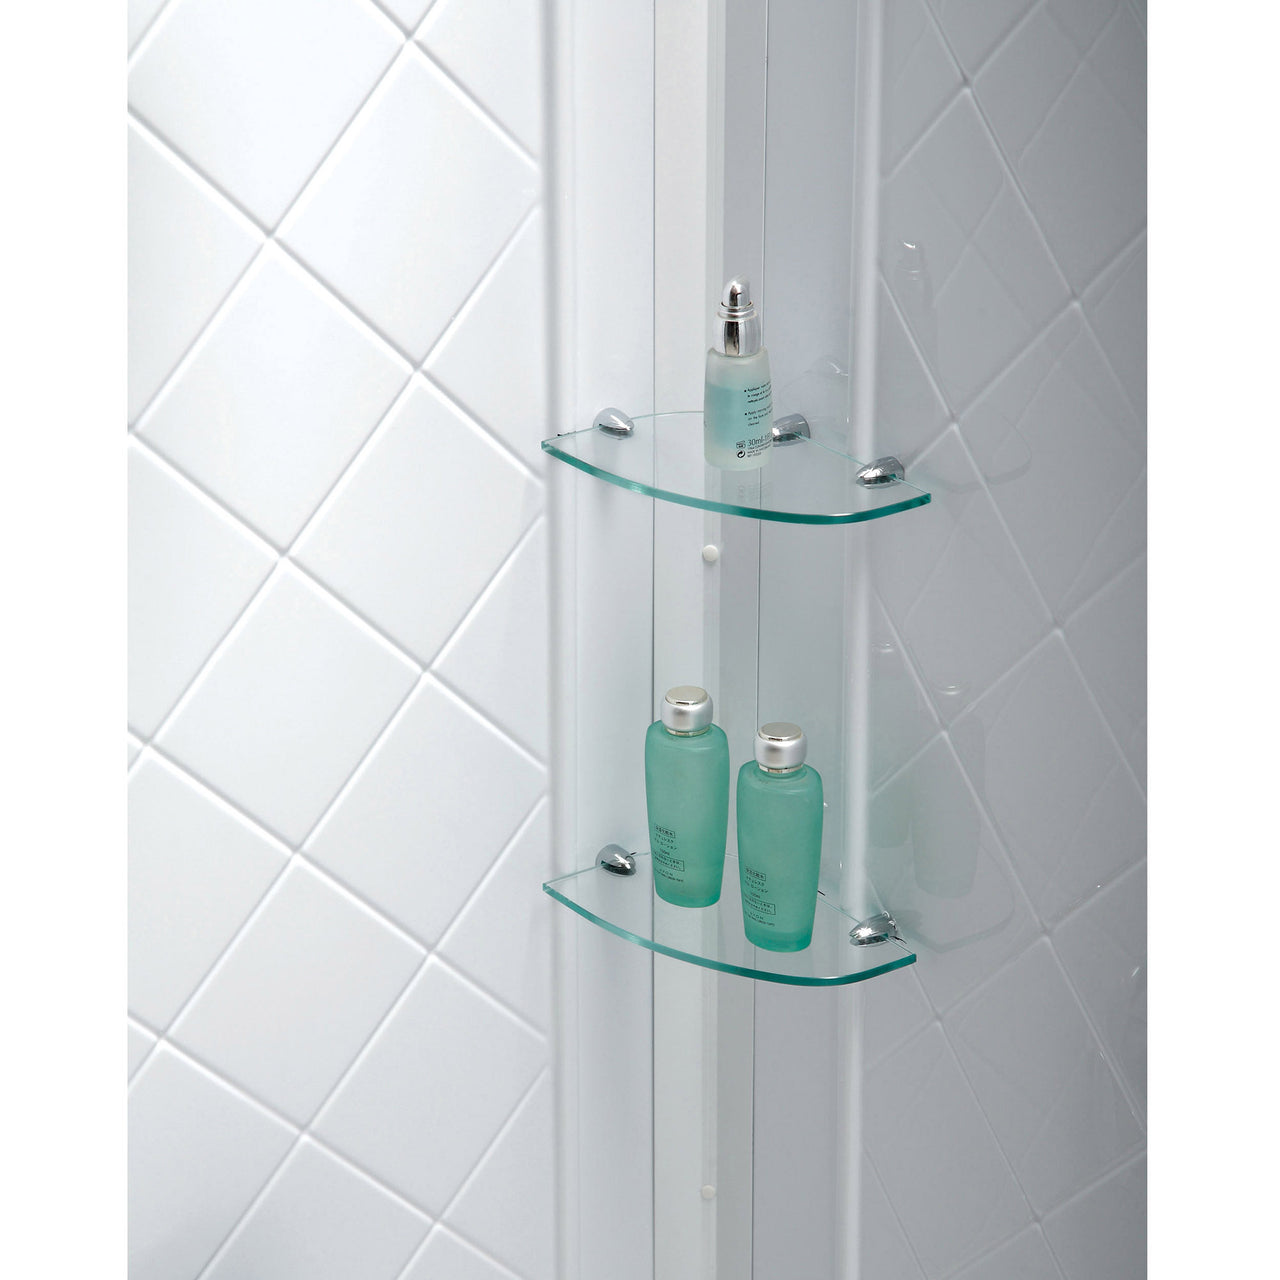 DreamLine Infinity-Z 36 in. D x 60 in. W x 76 3/4 in. H Semi-Frameless Sliding Shower Door, Shower Base and QWALL-5 Backwall Kit, Clear Glass - BNGBath